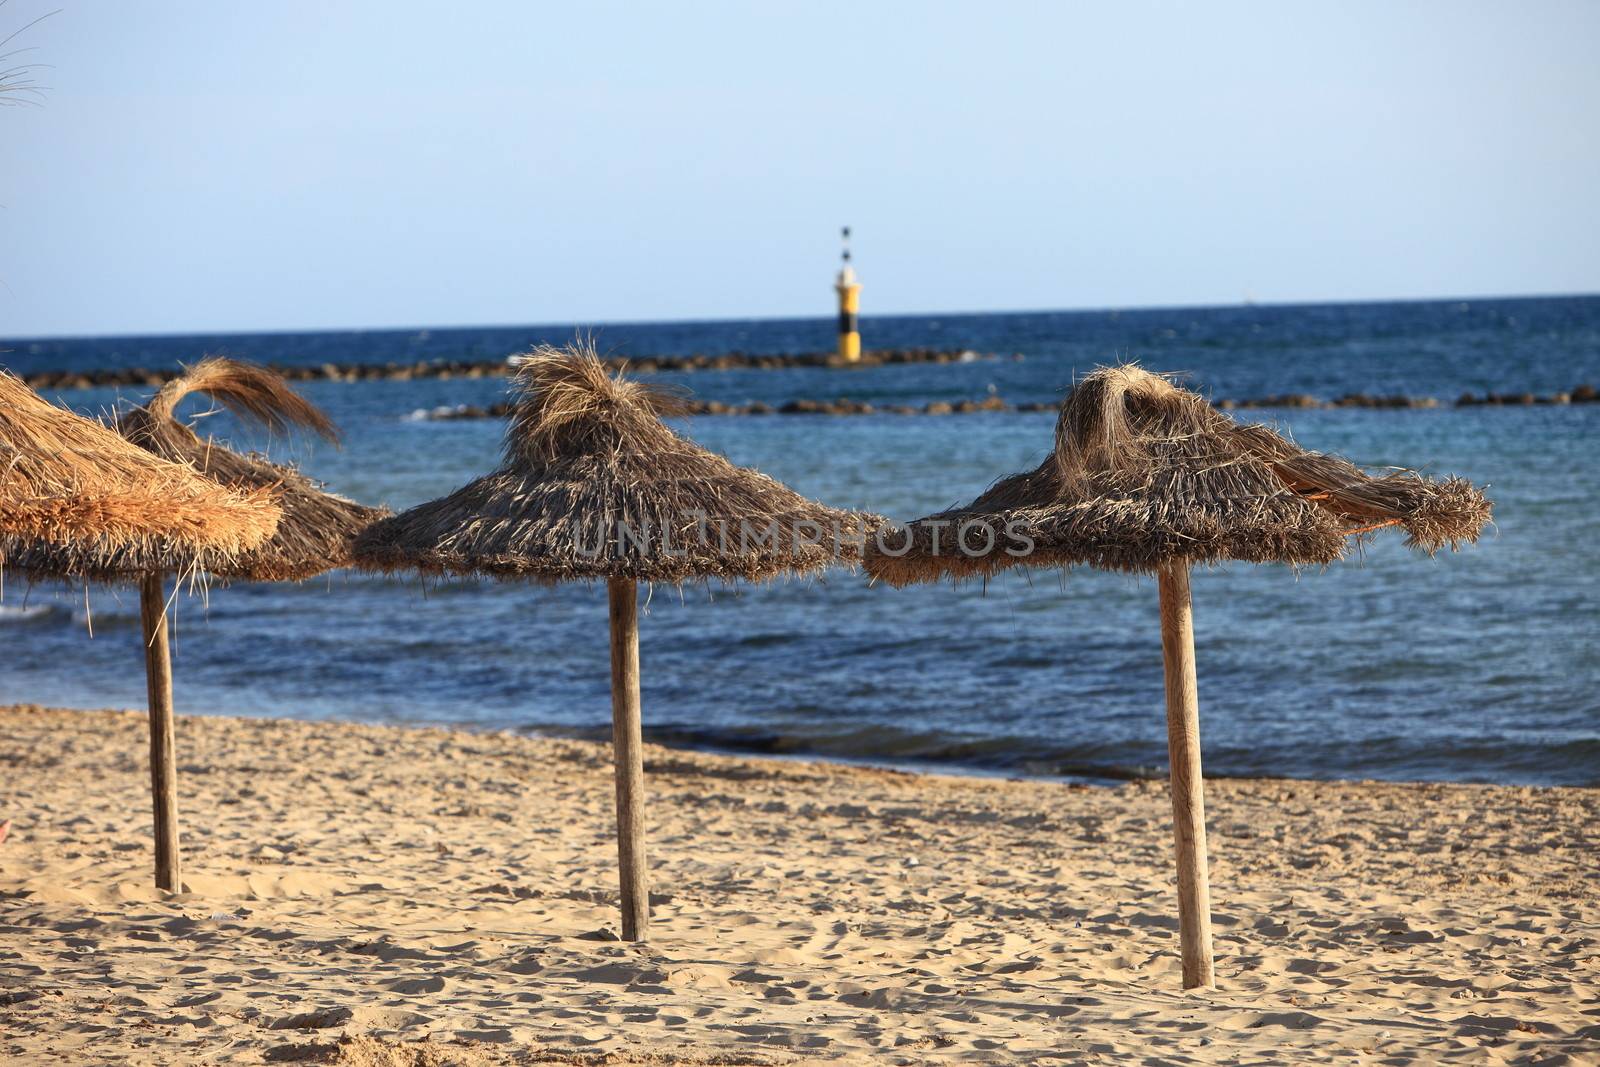 Traditional thatched umbrellas on wooden poles on a sandy tropical beach overlooking the ocean